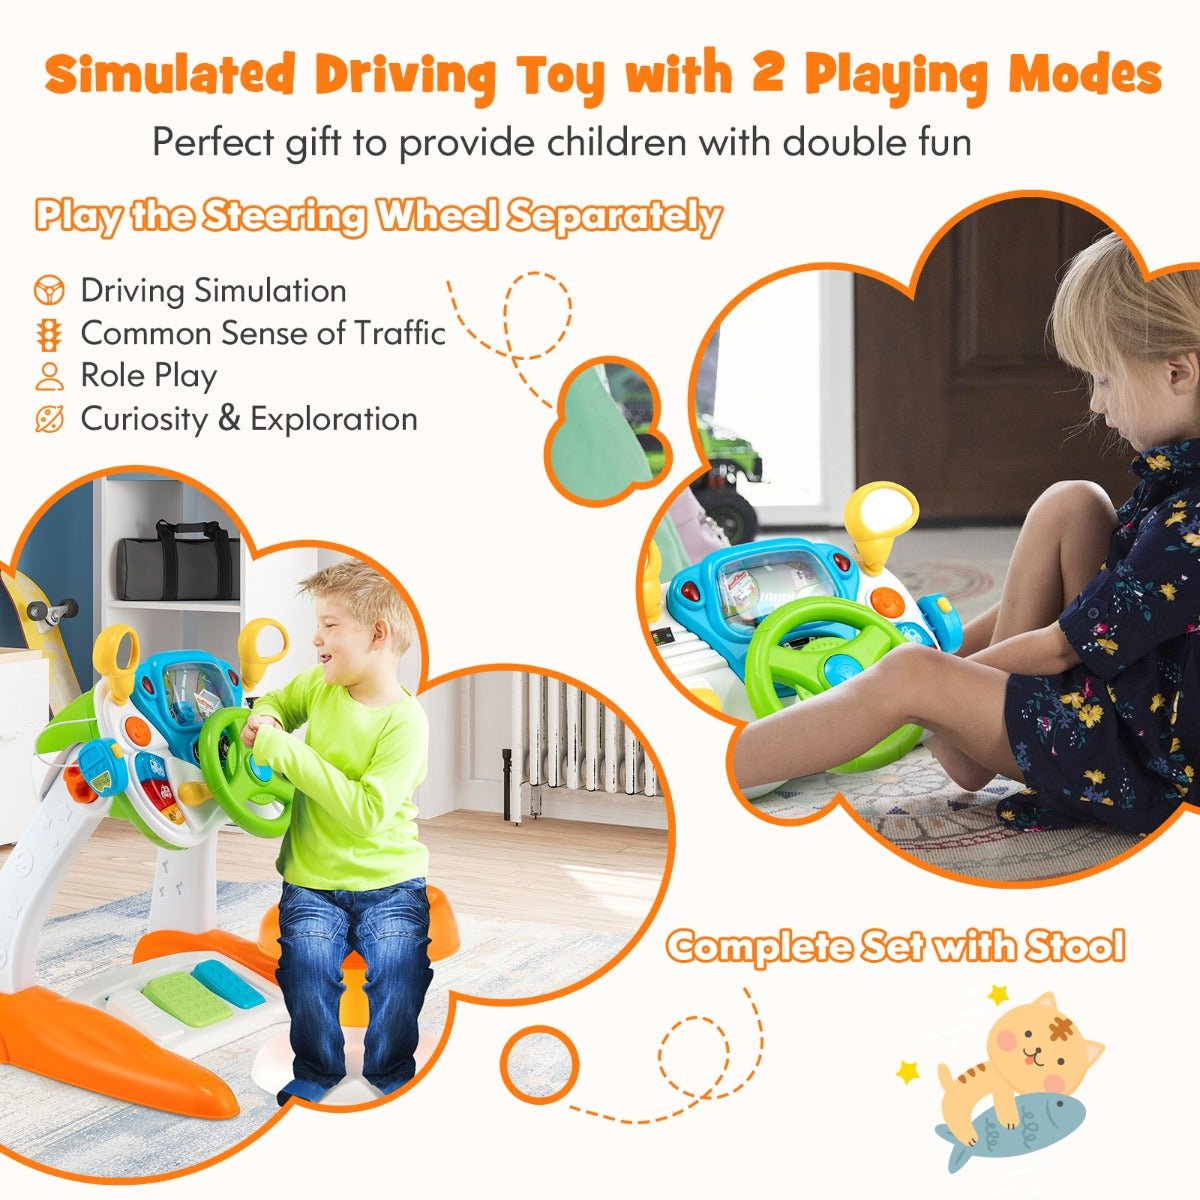 Children's Simulated Driving Toy - Steering Wheel Set with Lights & Sounds